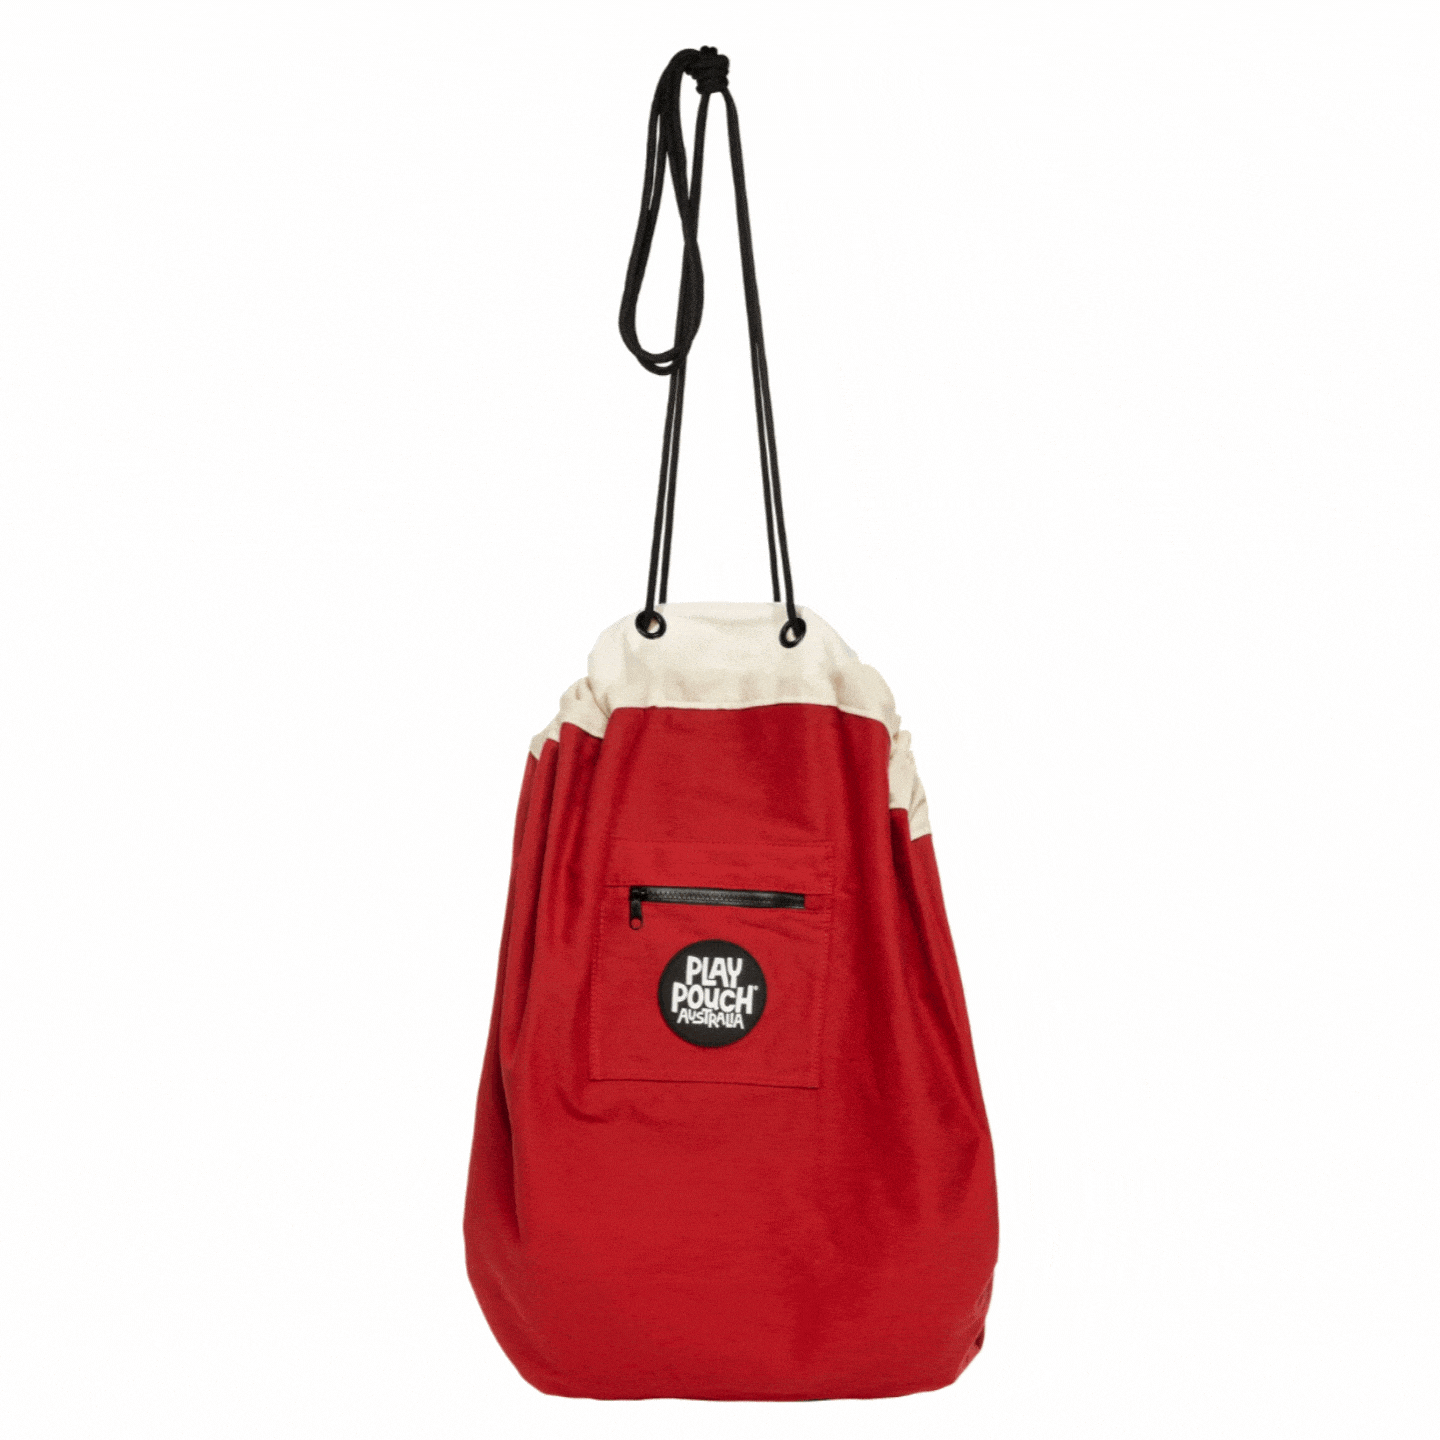 Rocket Red Original Play Pouch